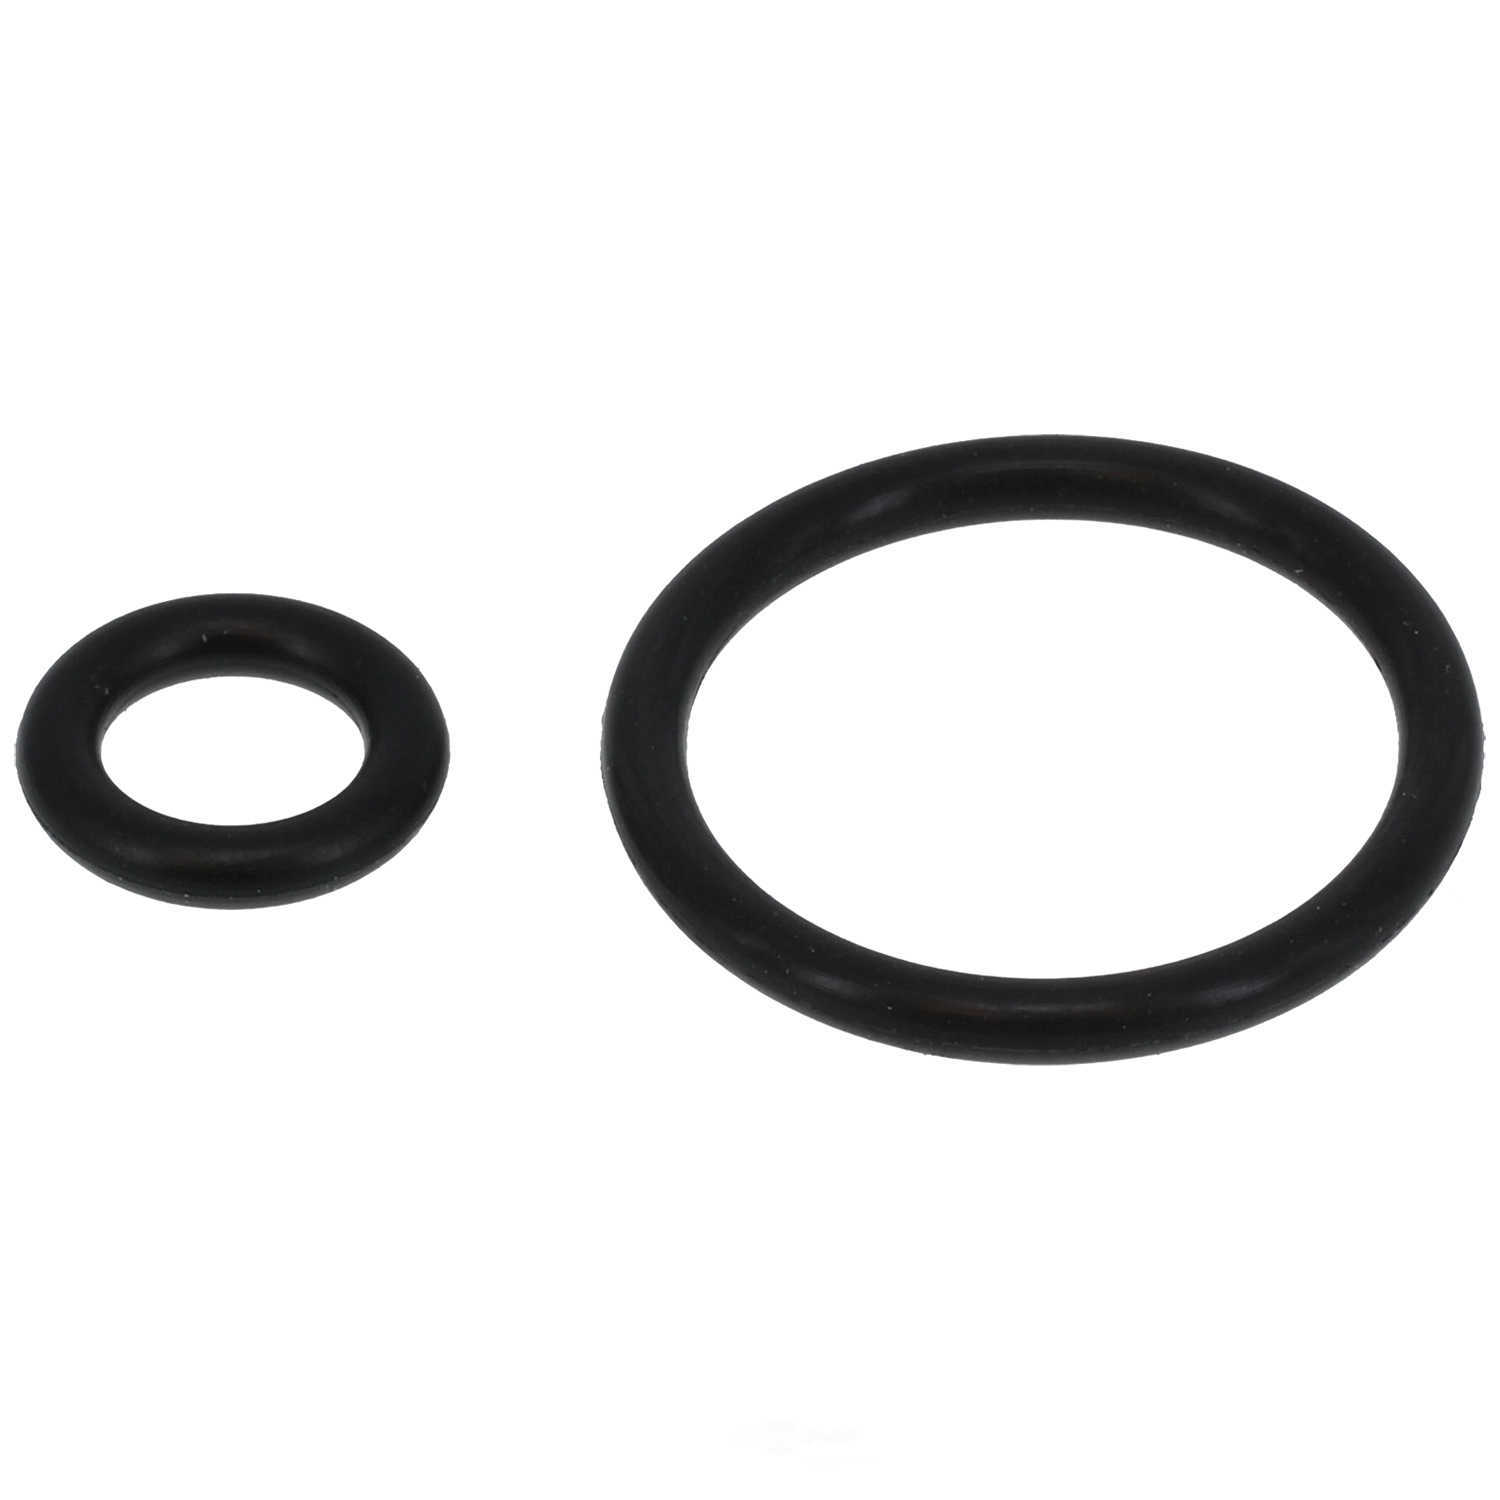 GB REMANUFACTURING INC. - Fuel Injector Seal Kit - GBR 8-018